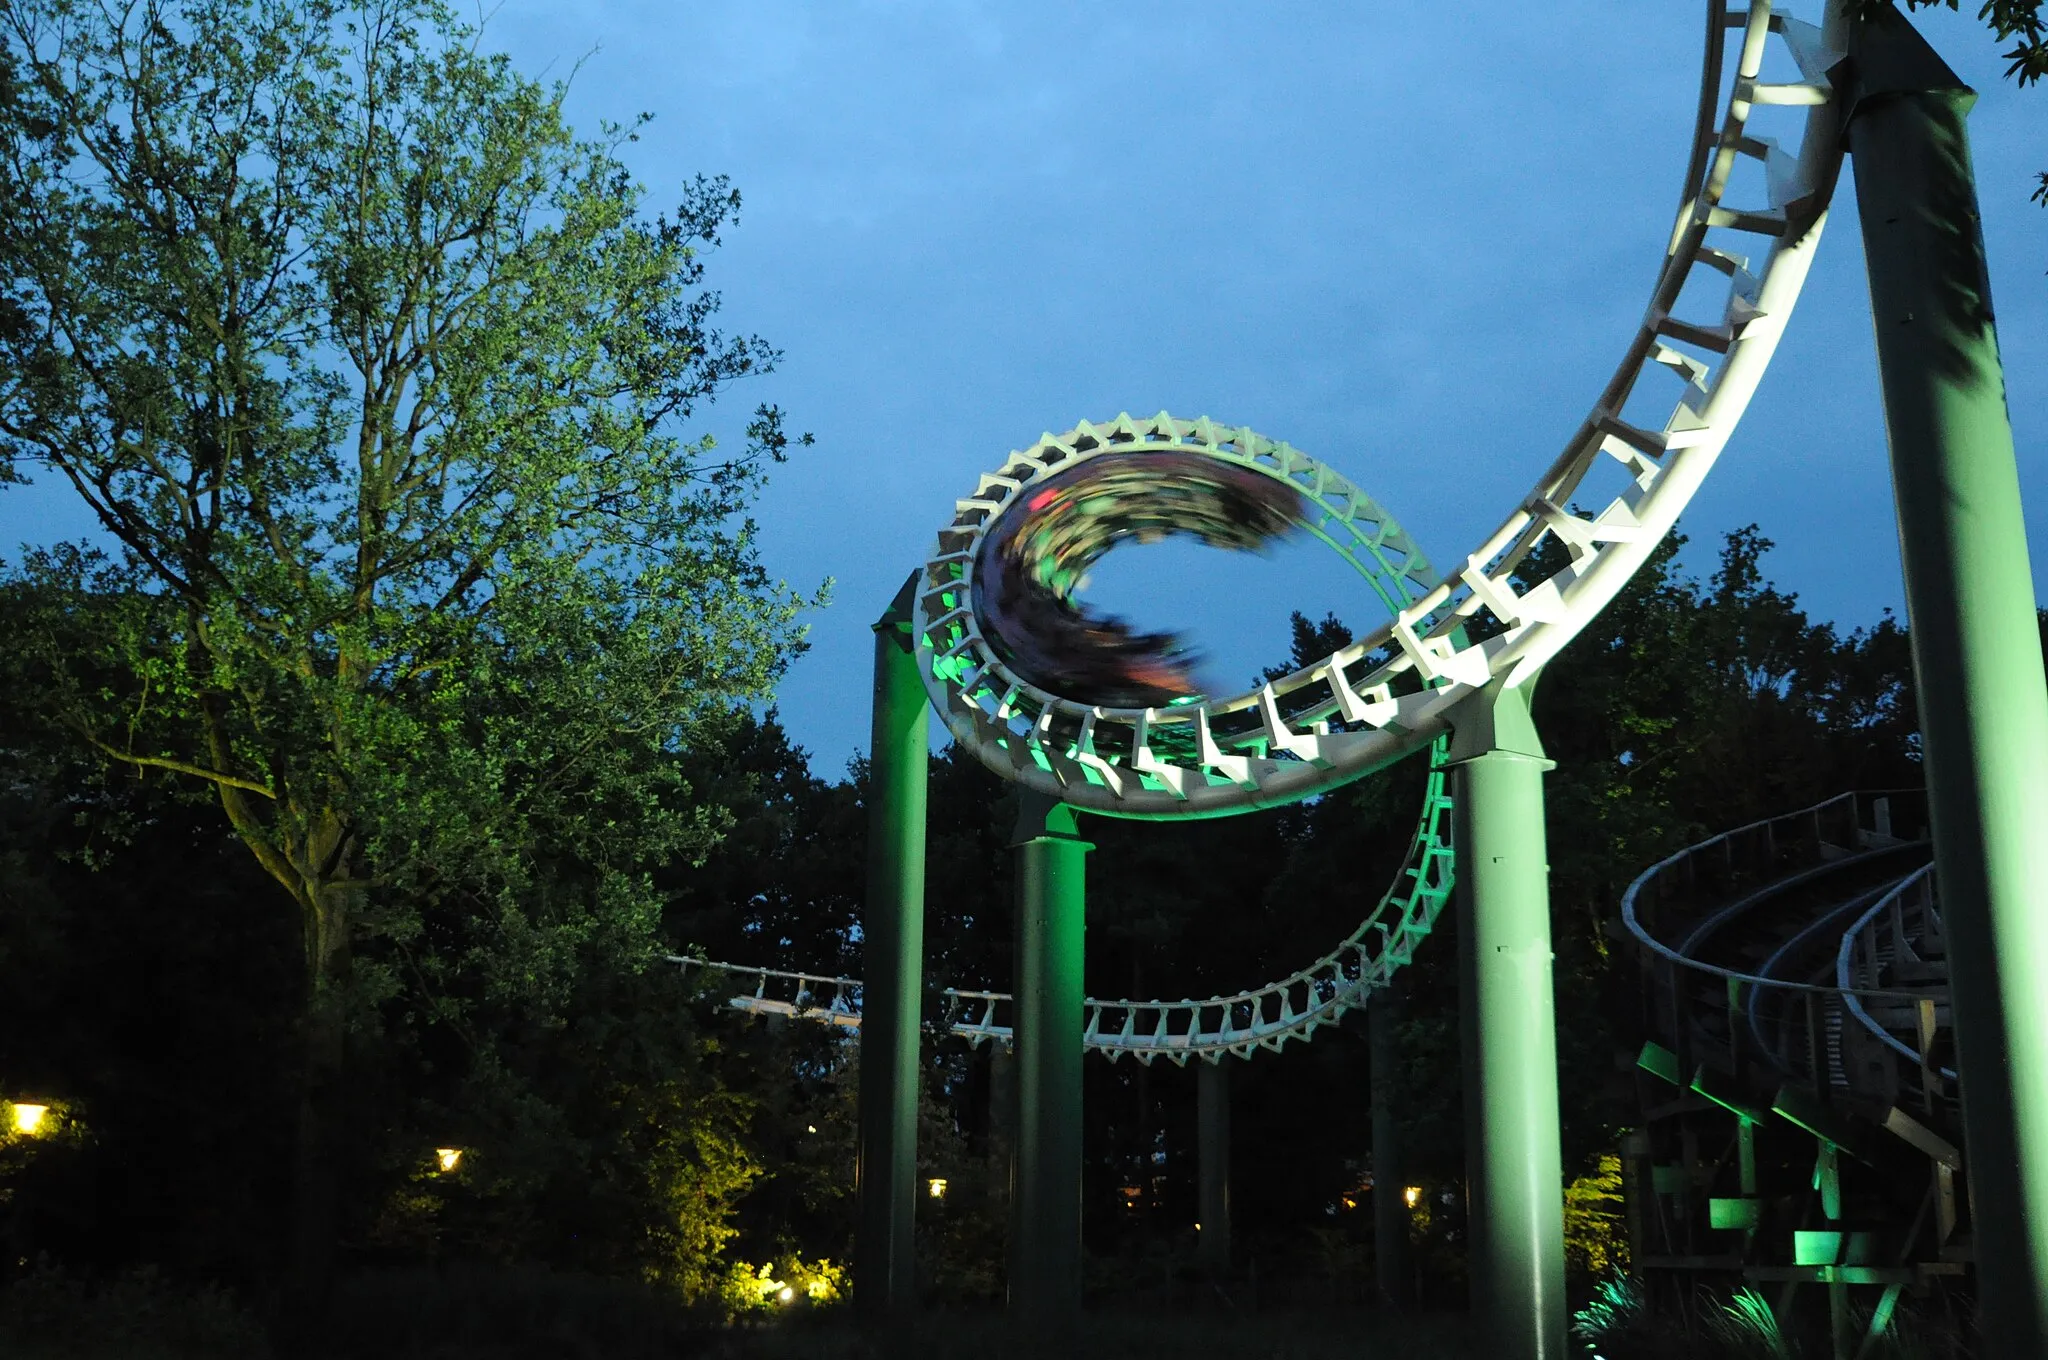 Photo showing: Picture published on Flickr with the title "Efteling Python" and the description: "Action shot during the last bit of day light".